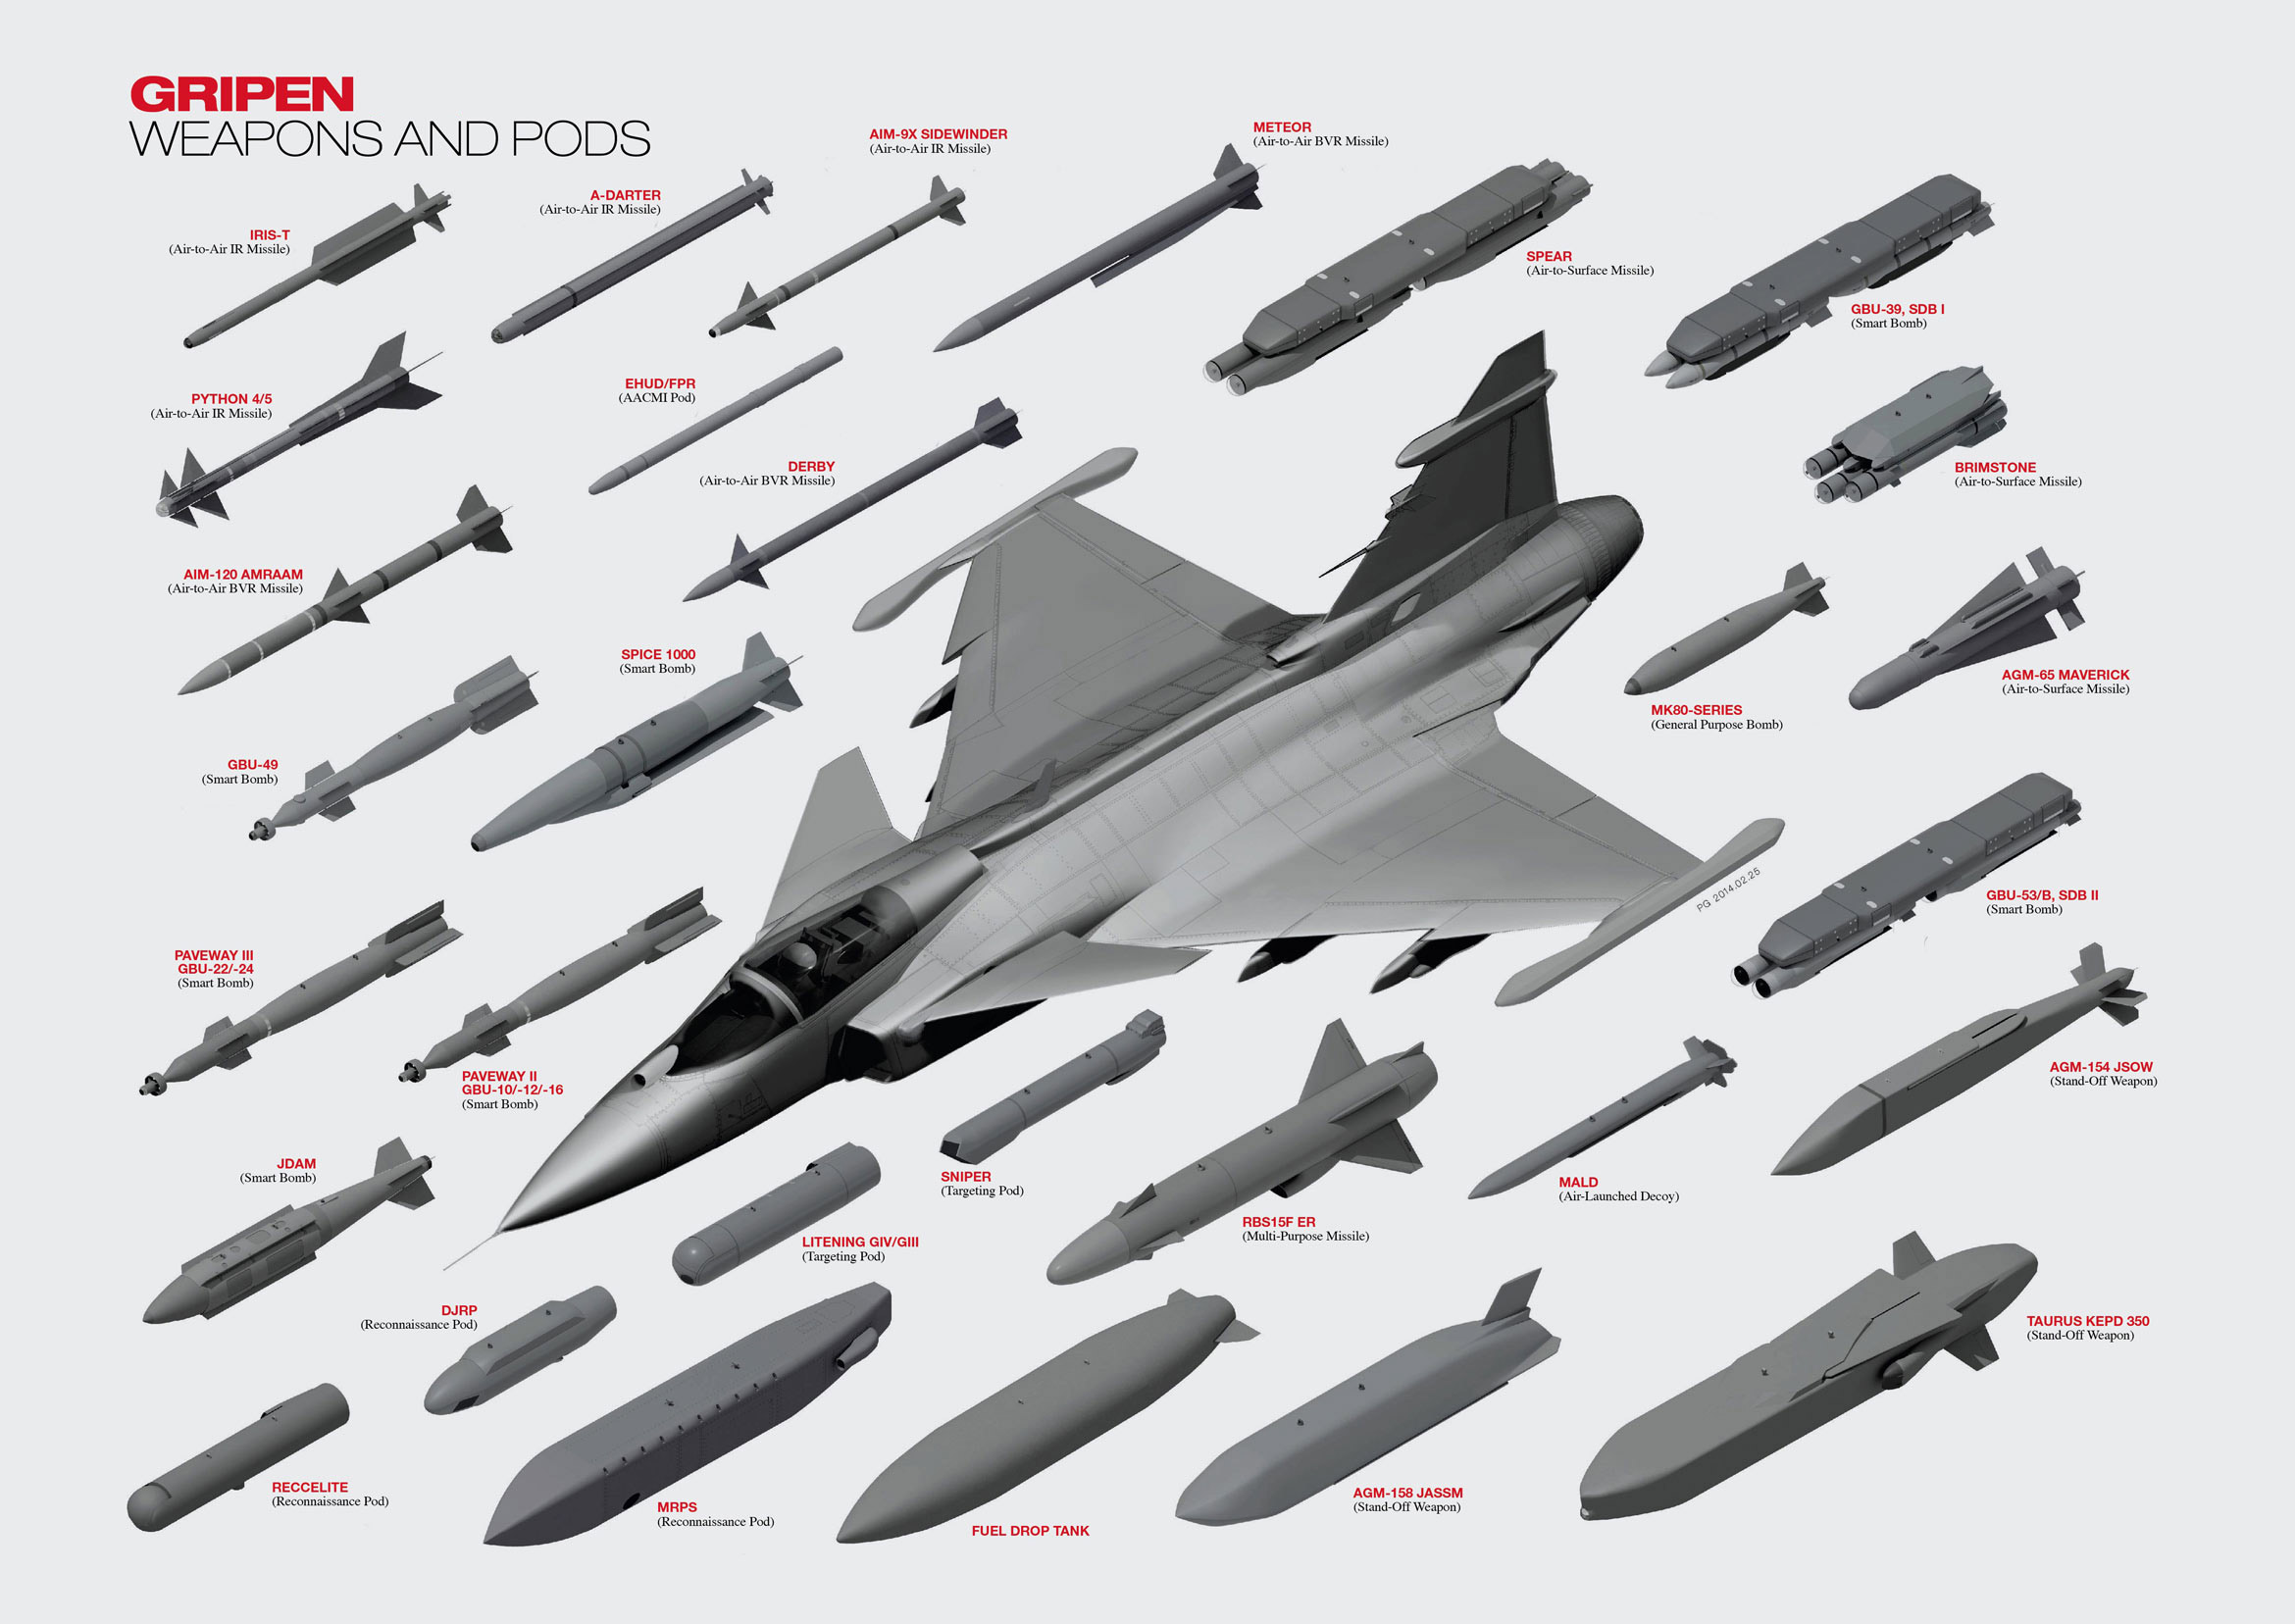 Saab Gripen E/F Weapons and Pods